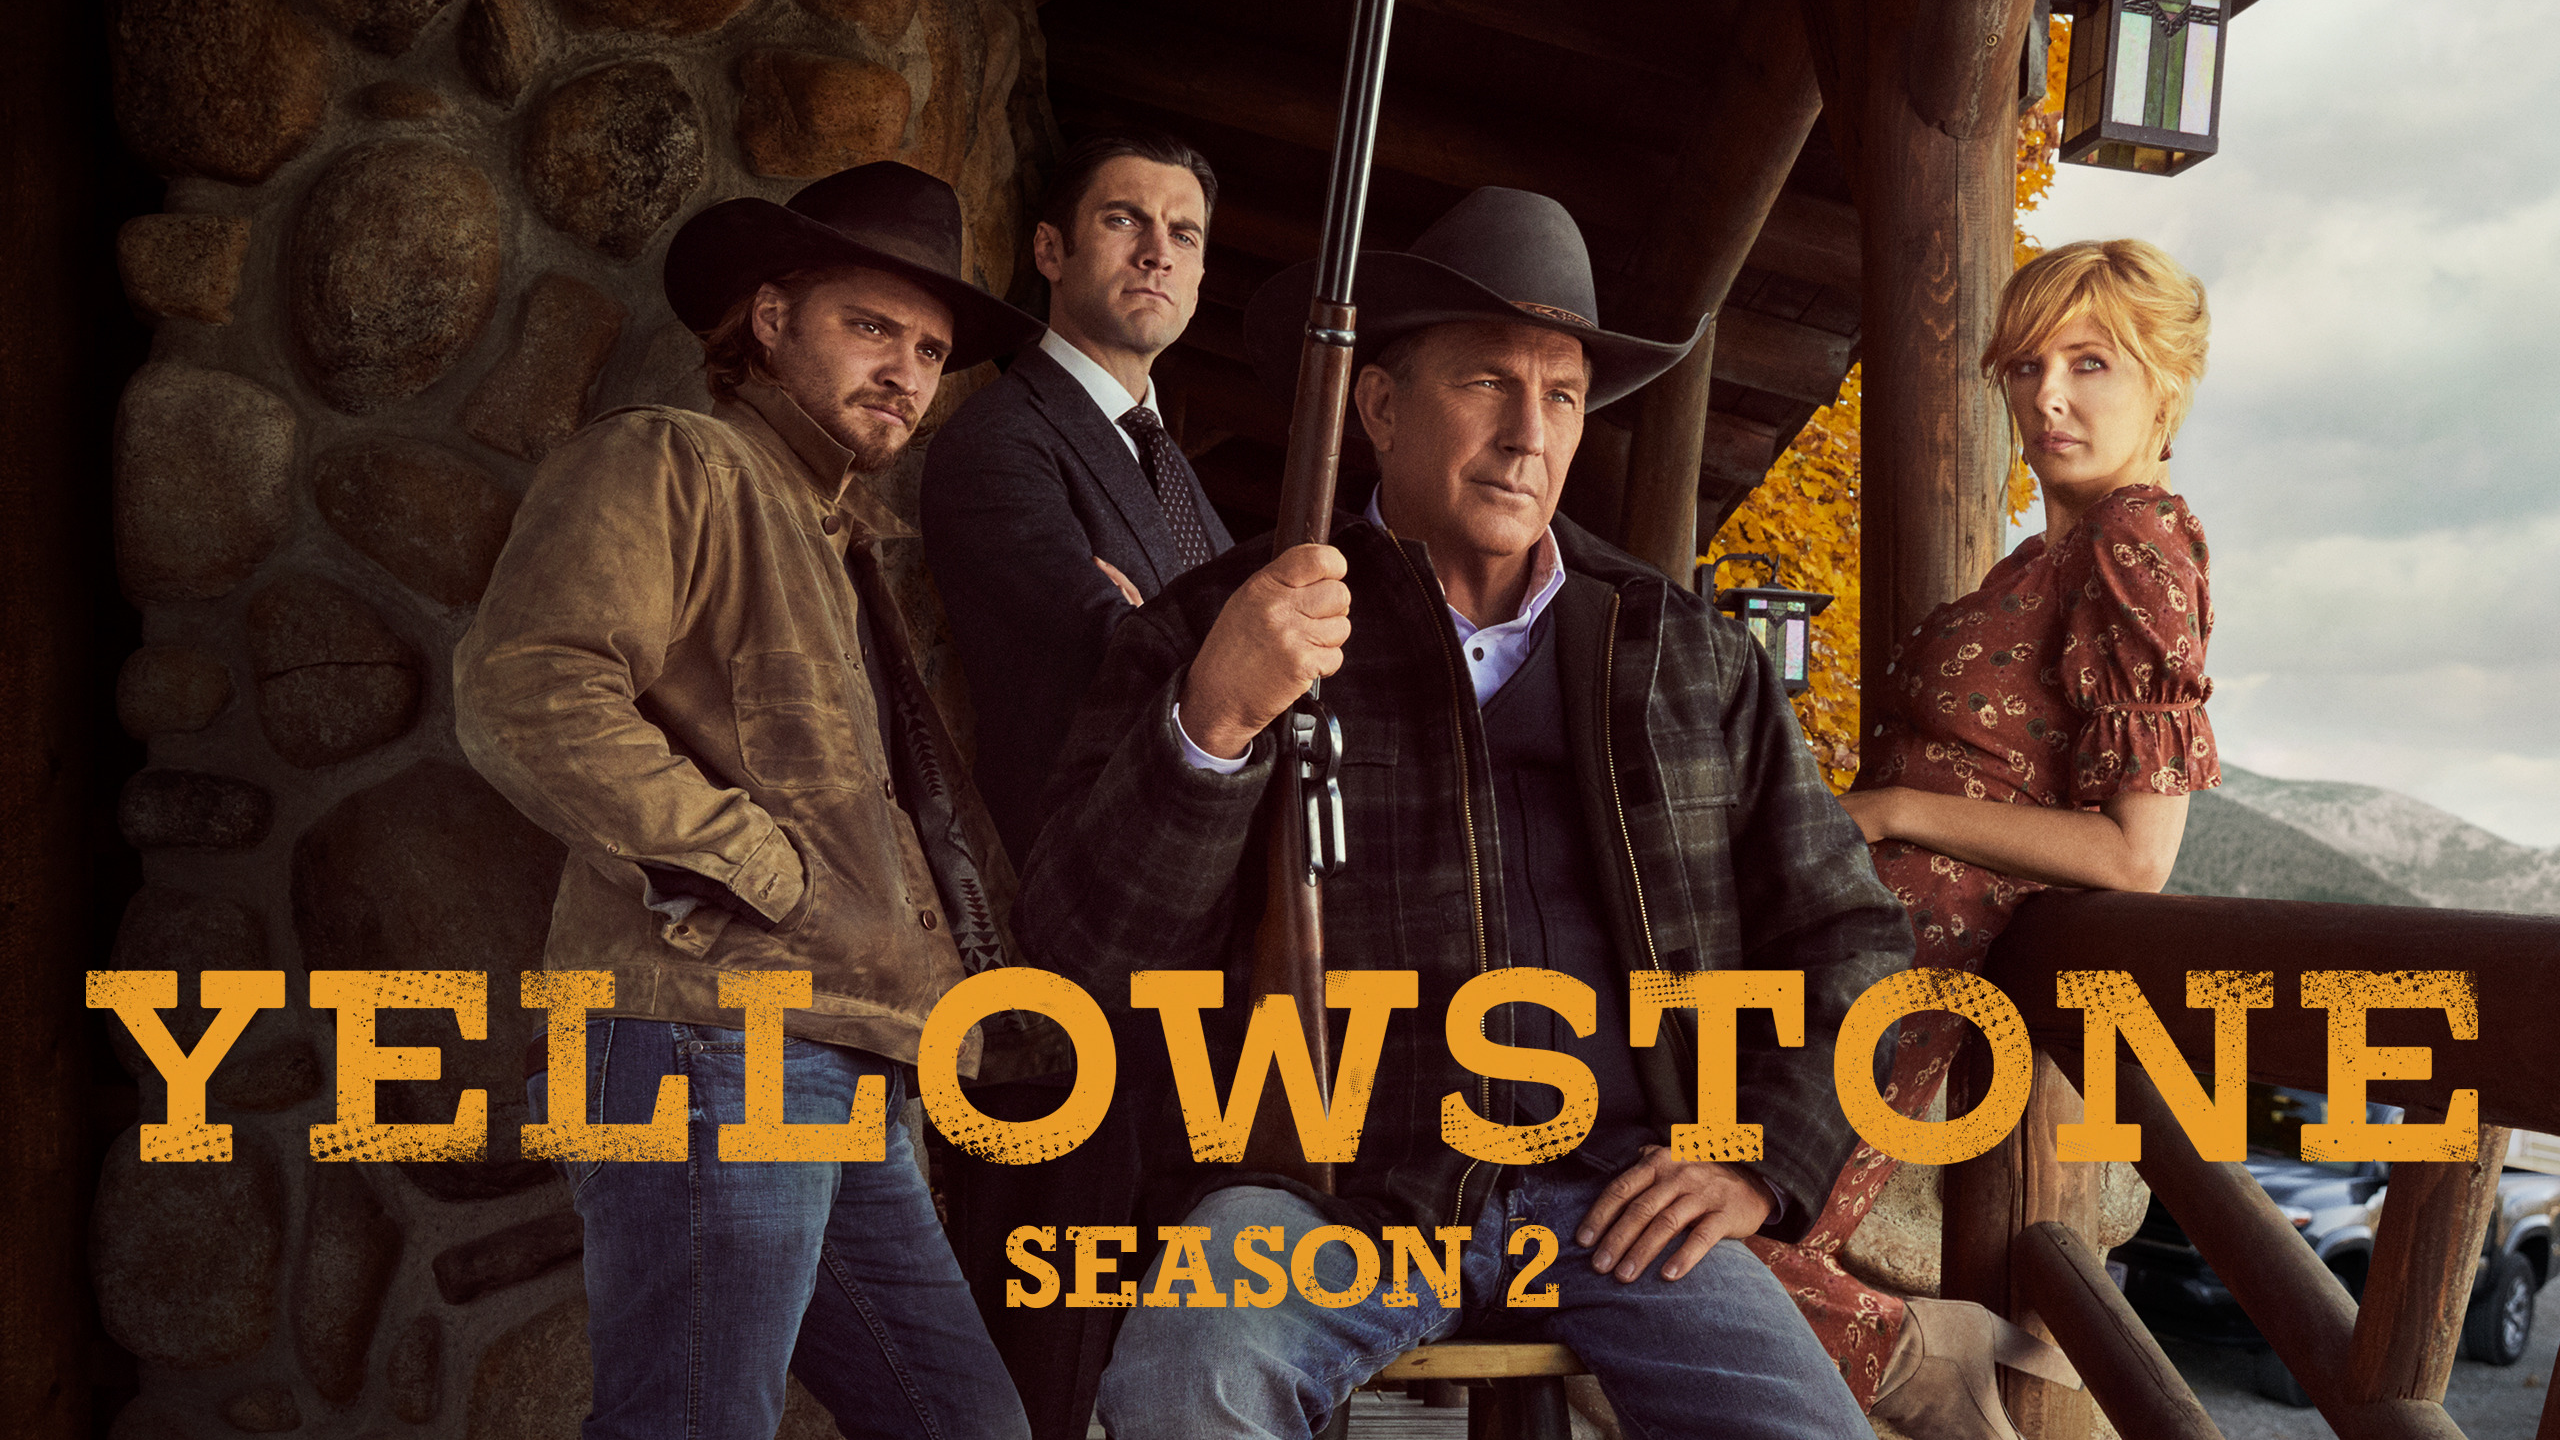 Factors Influencing Release Times for Shows Like Yellowstone